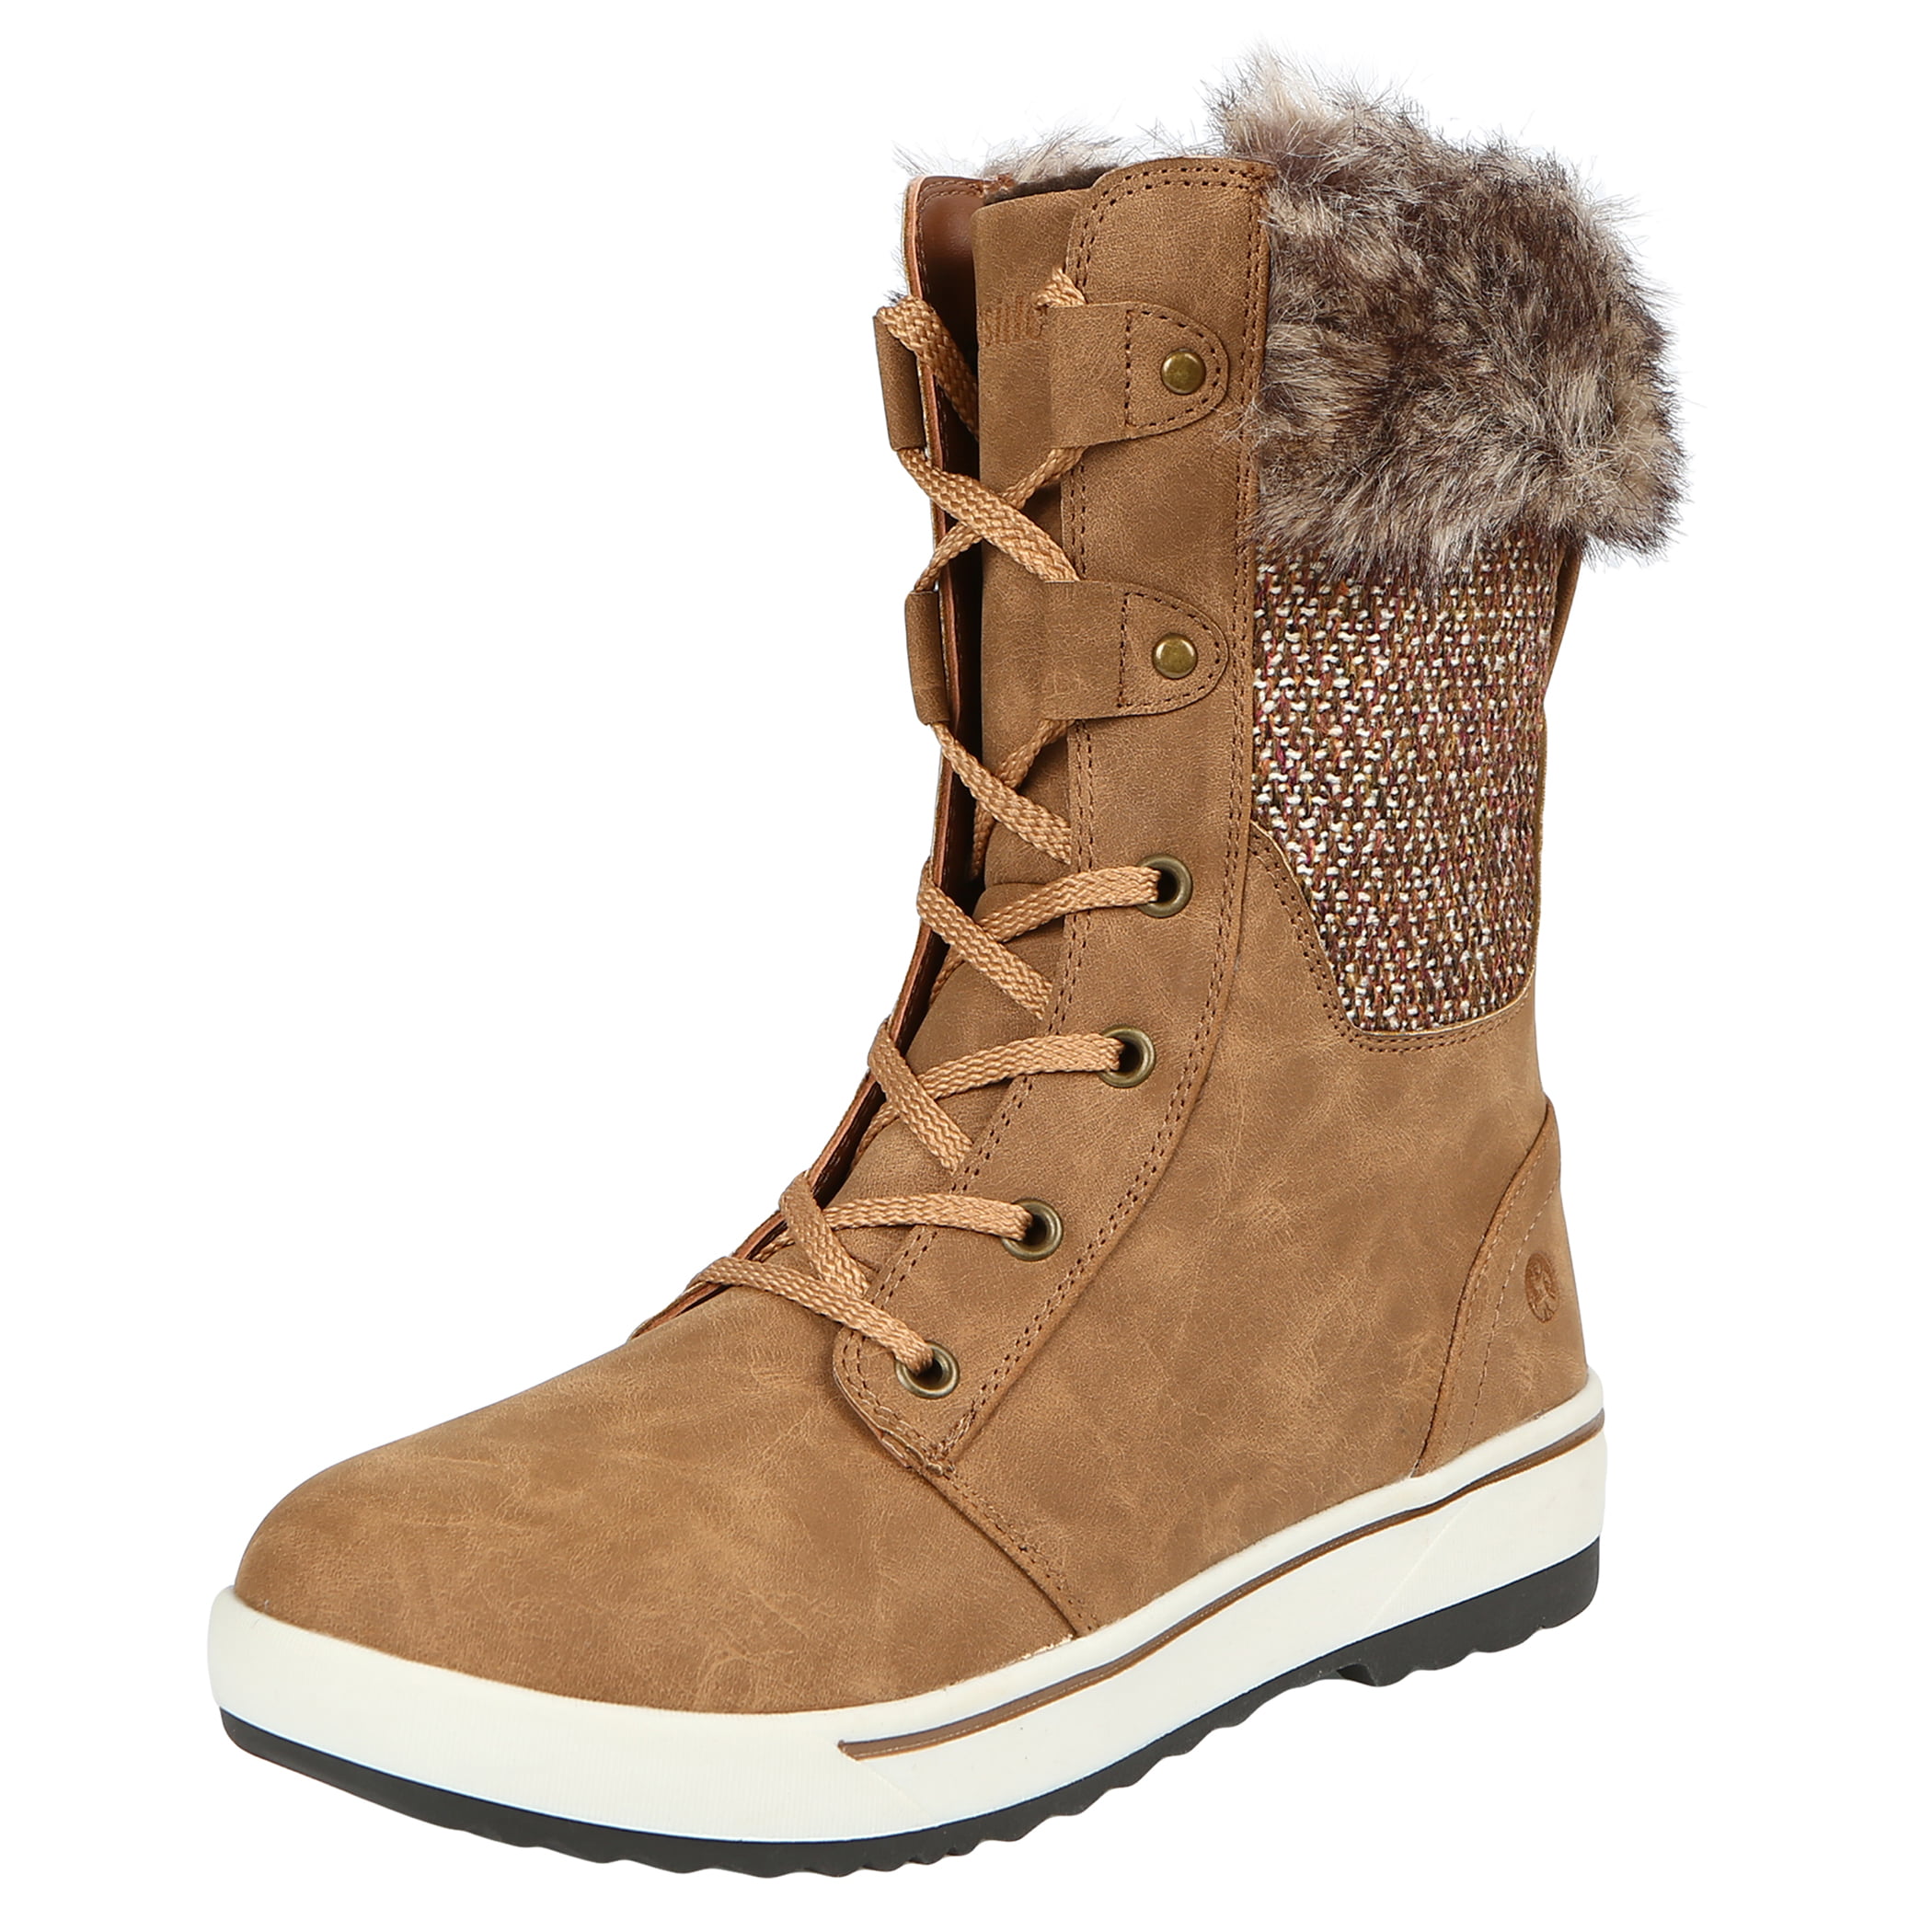 Northside Womens BROOKELLE Snow Boot